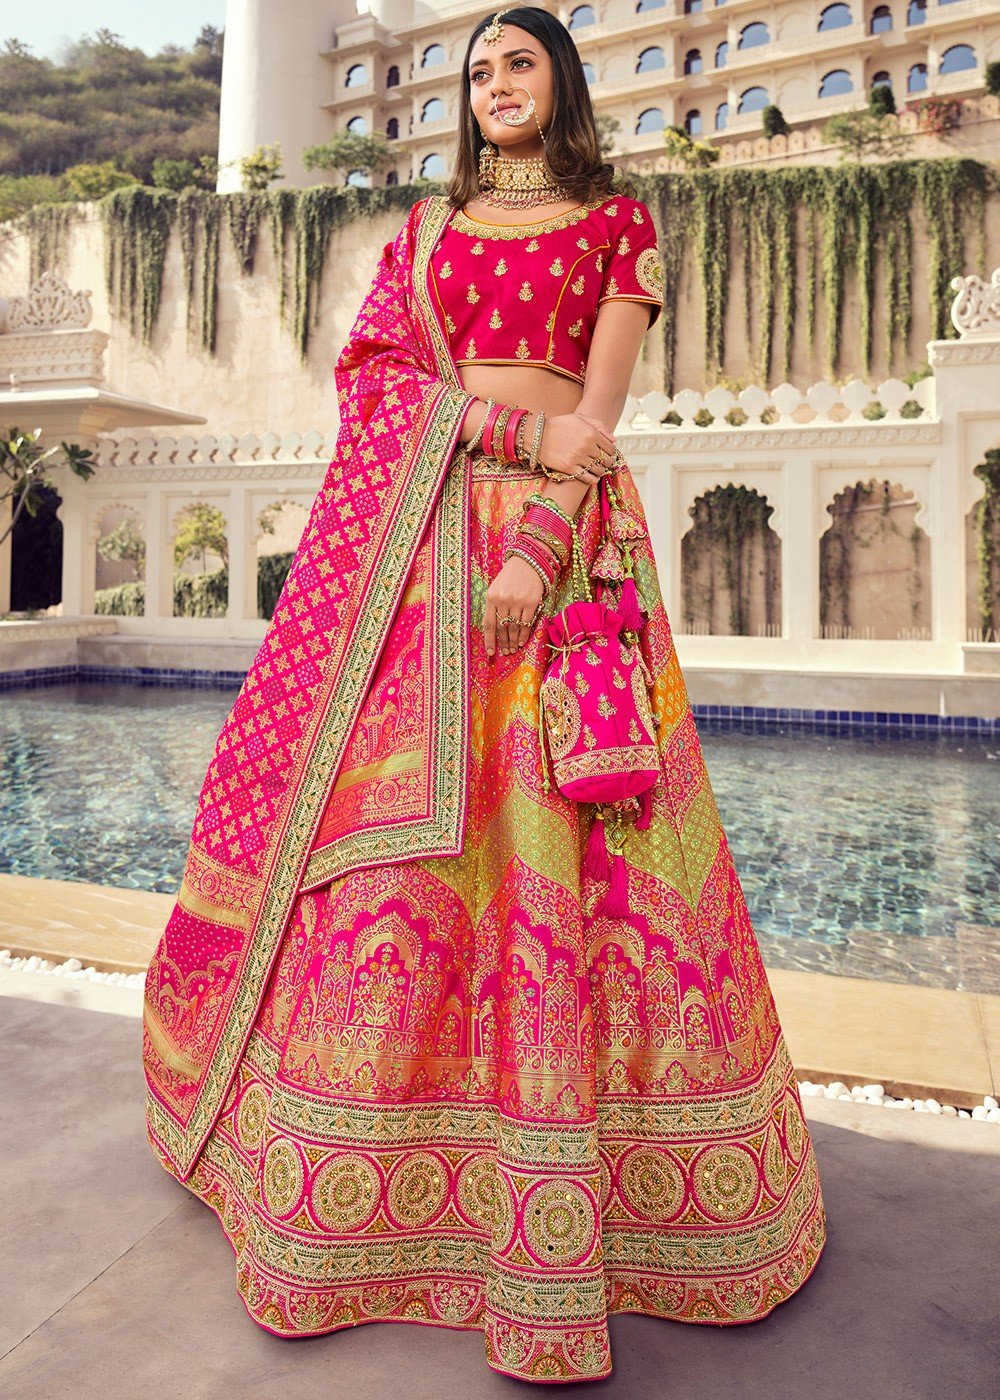 Bridal Lehenga in Central Chandigarh, Central Chandigarh Bridal Lehenga |  Weddingplz